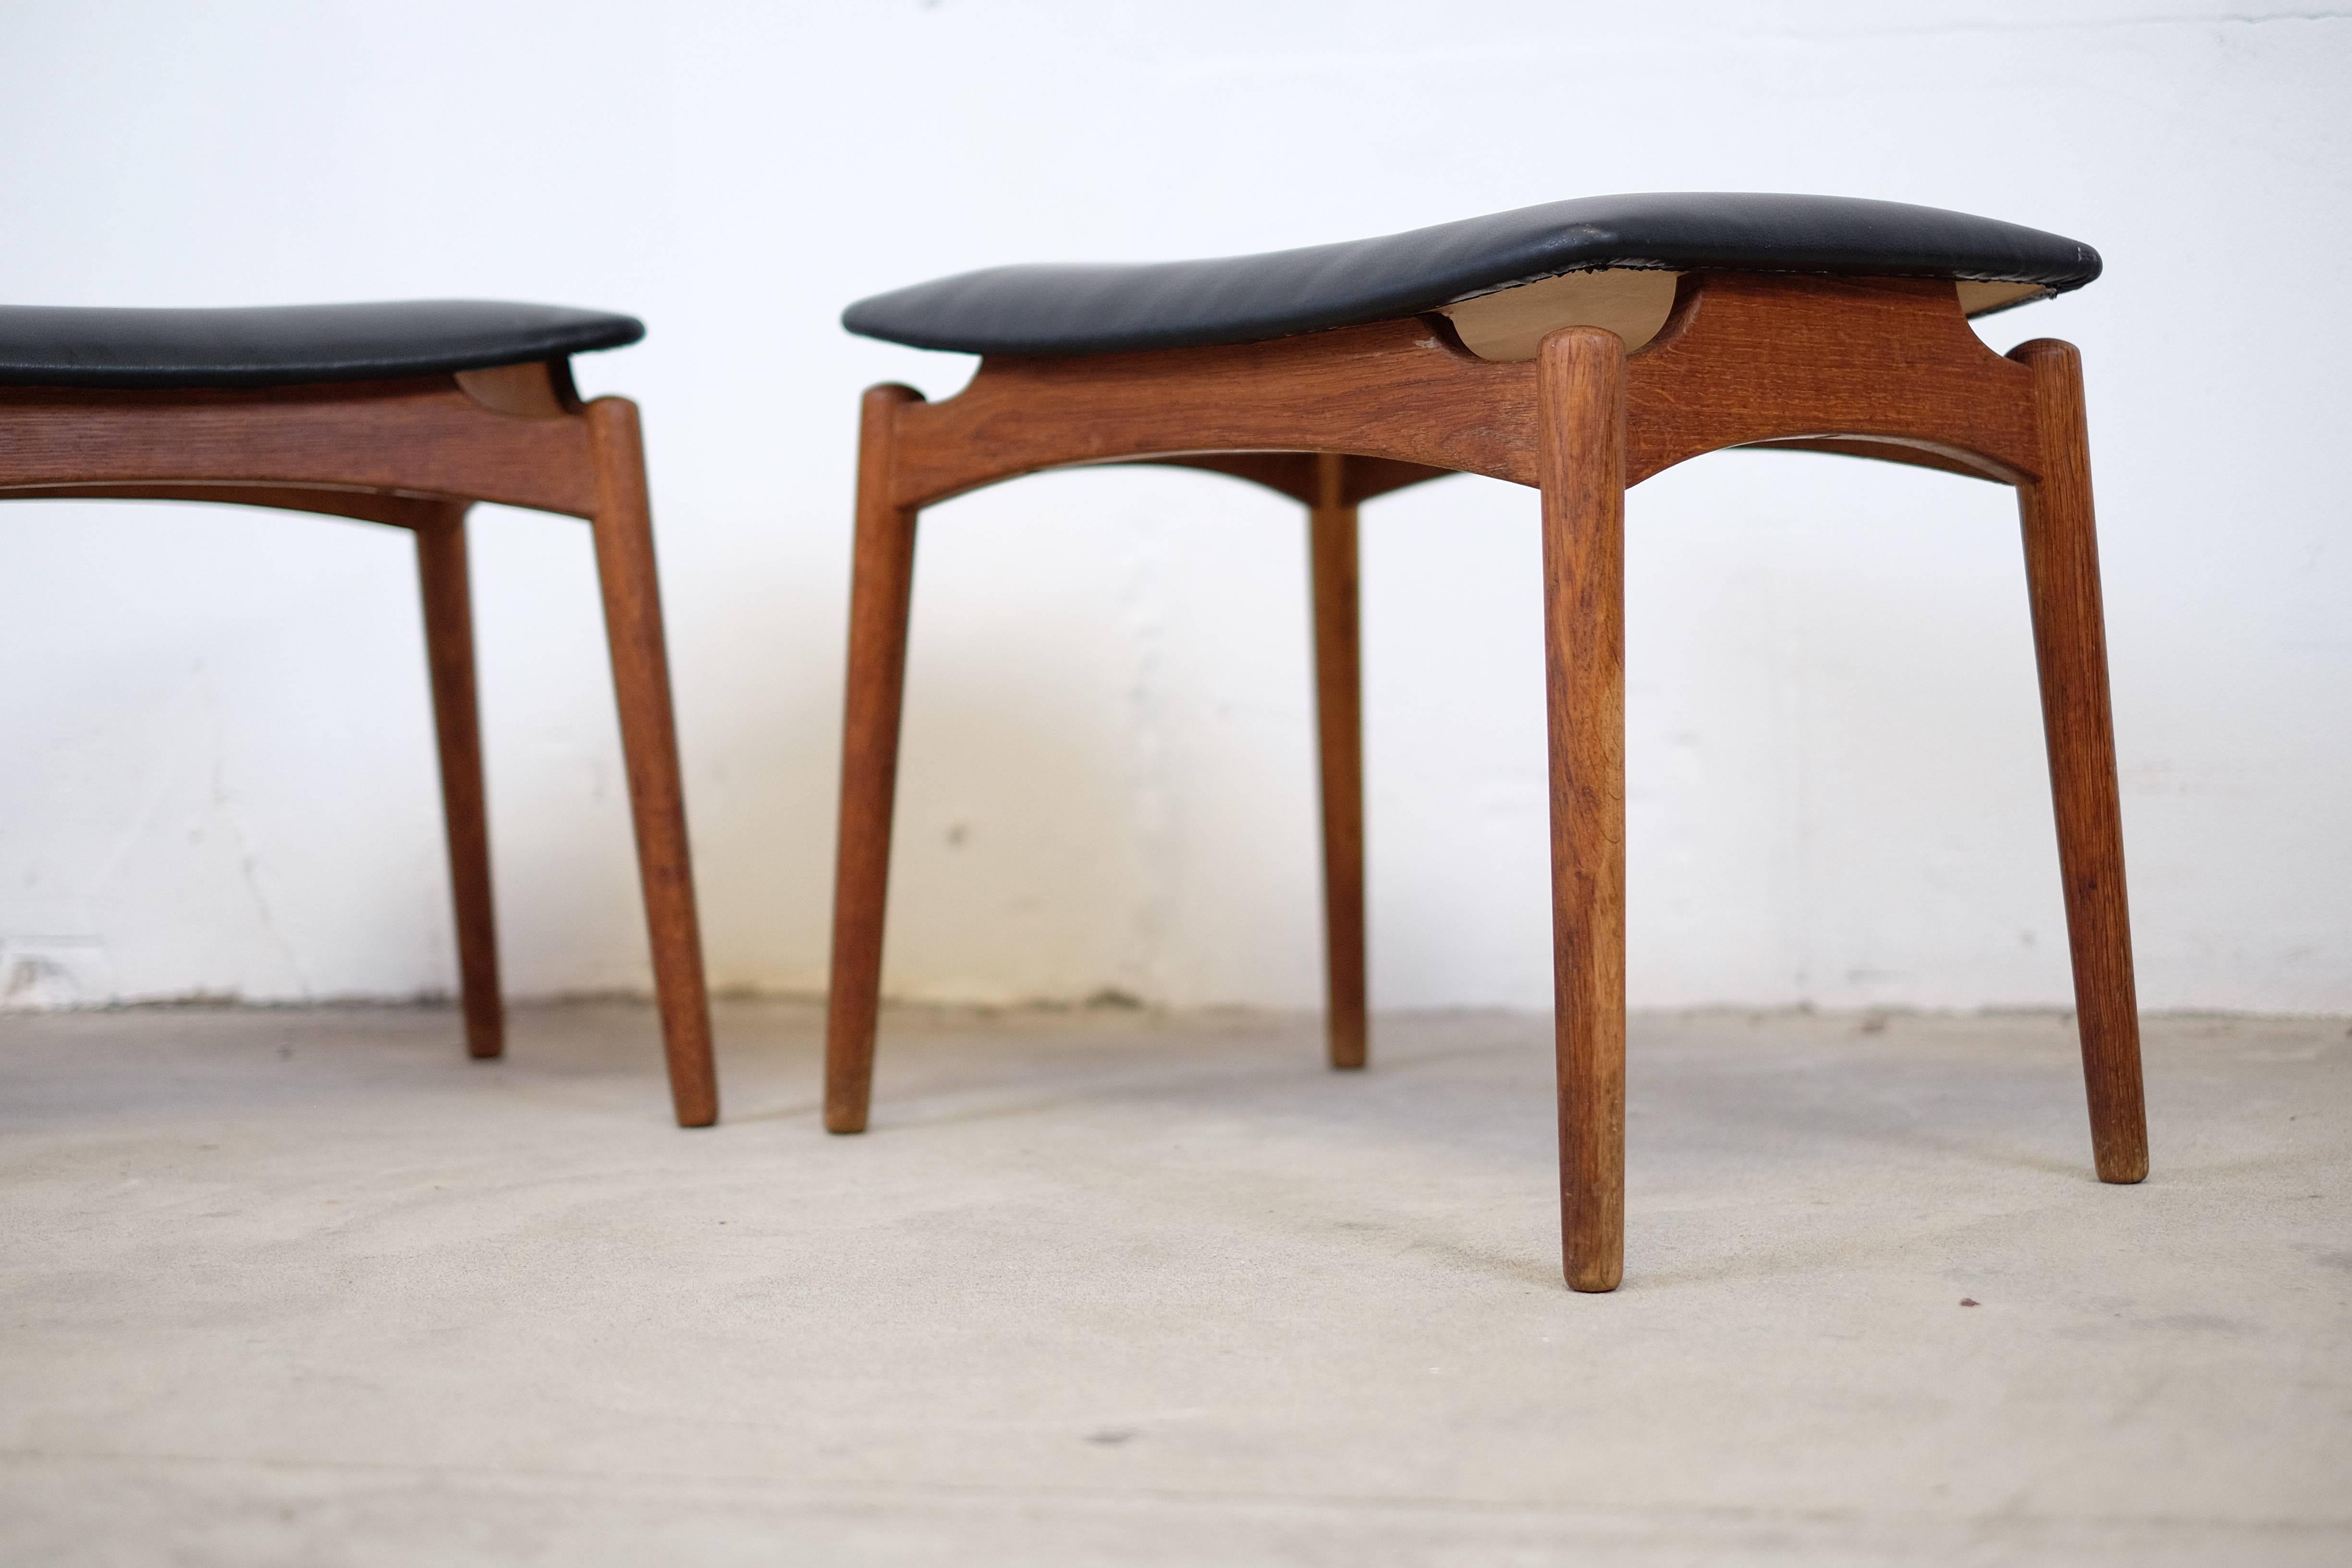 This beautiful set of midcentury stools was designed and manufactured in Denmark by Ølholm Møbelfabrik during the 1950s.
The frame is made from solid oak and the seat is upholstered in artificial leather. This stools remains in a good vintage